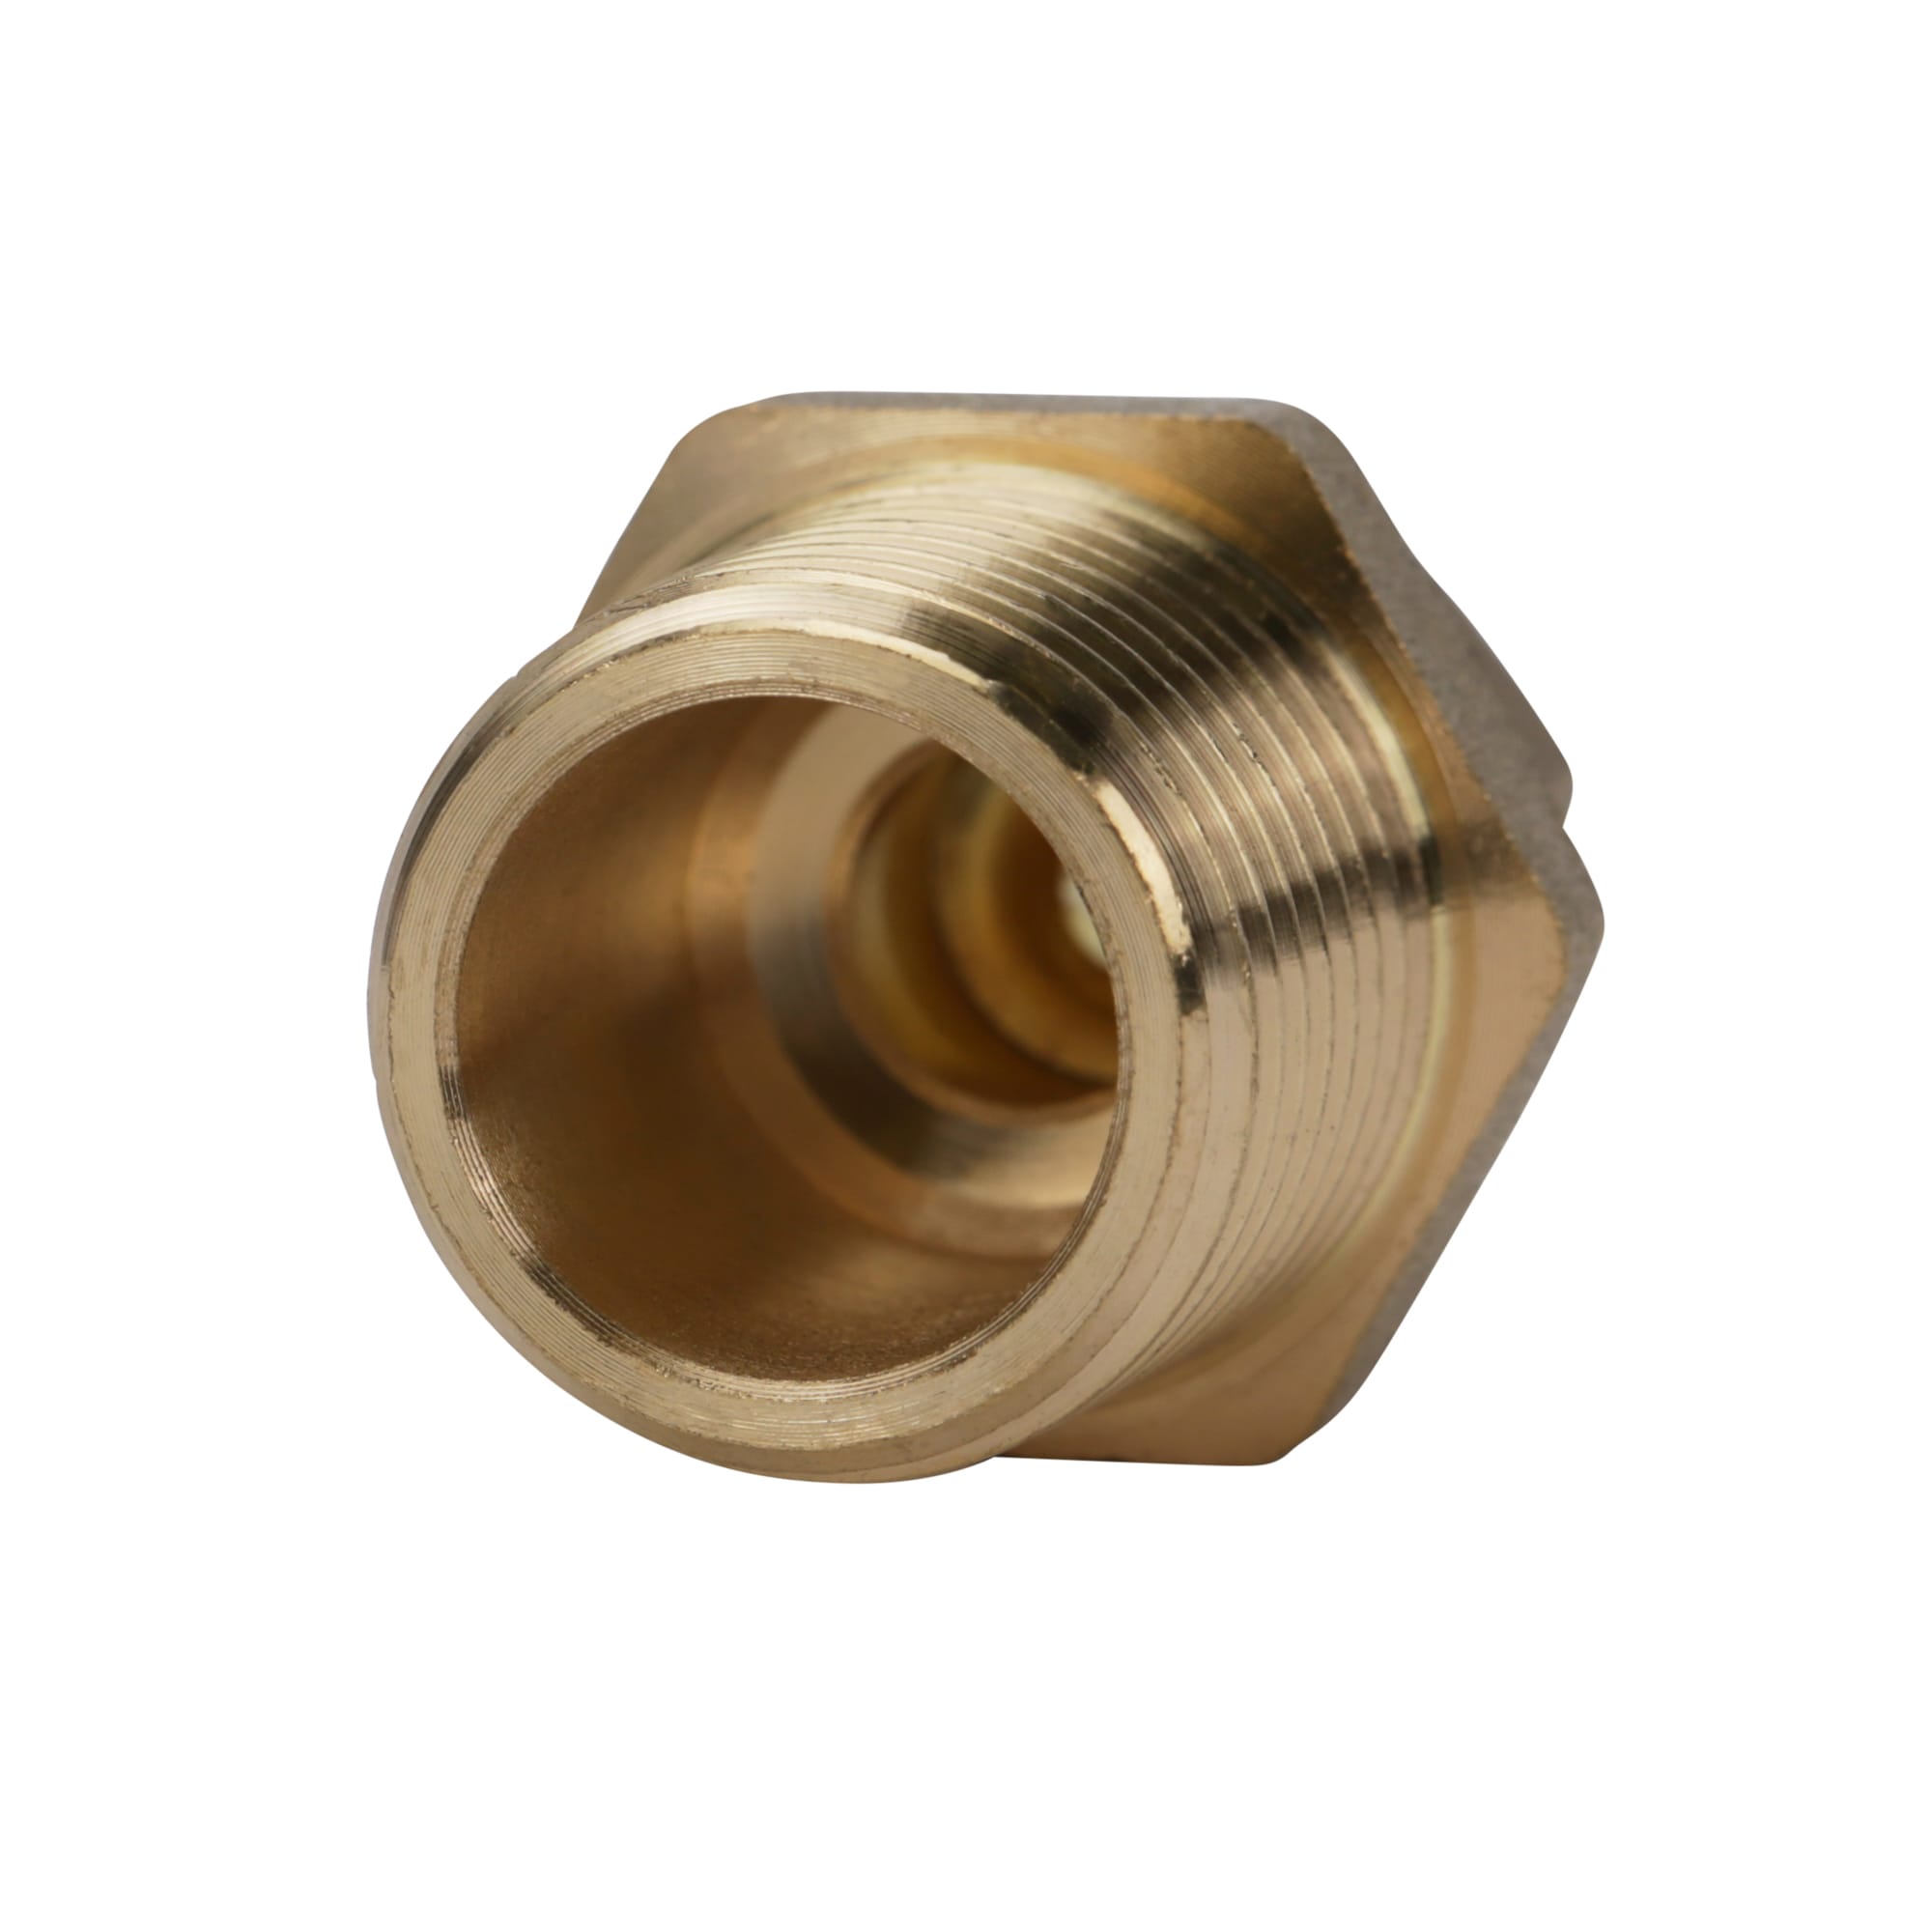 Plumbing N Parts 0.25 W x 0.375-in Brass Compression Union, Pack of 10  PNP-35508